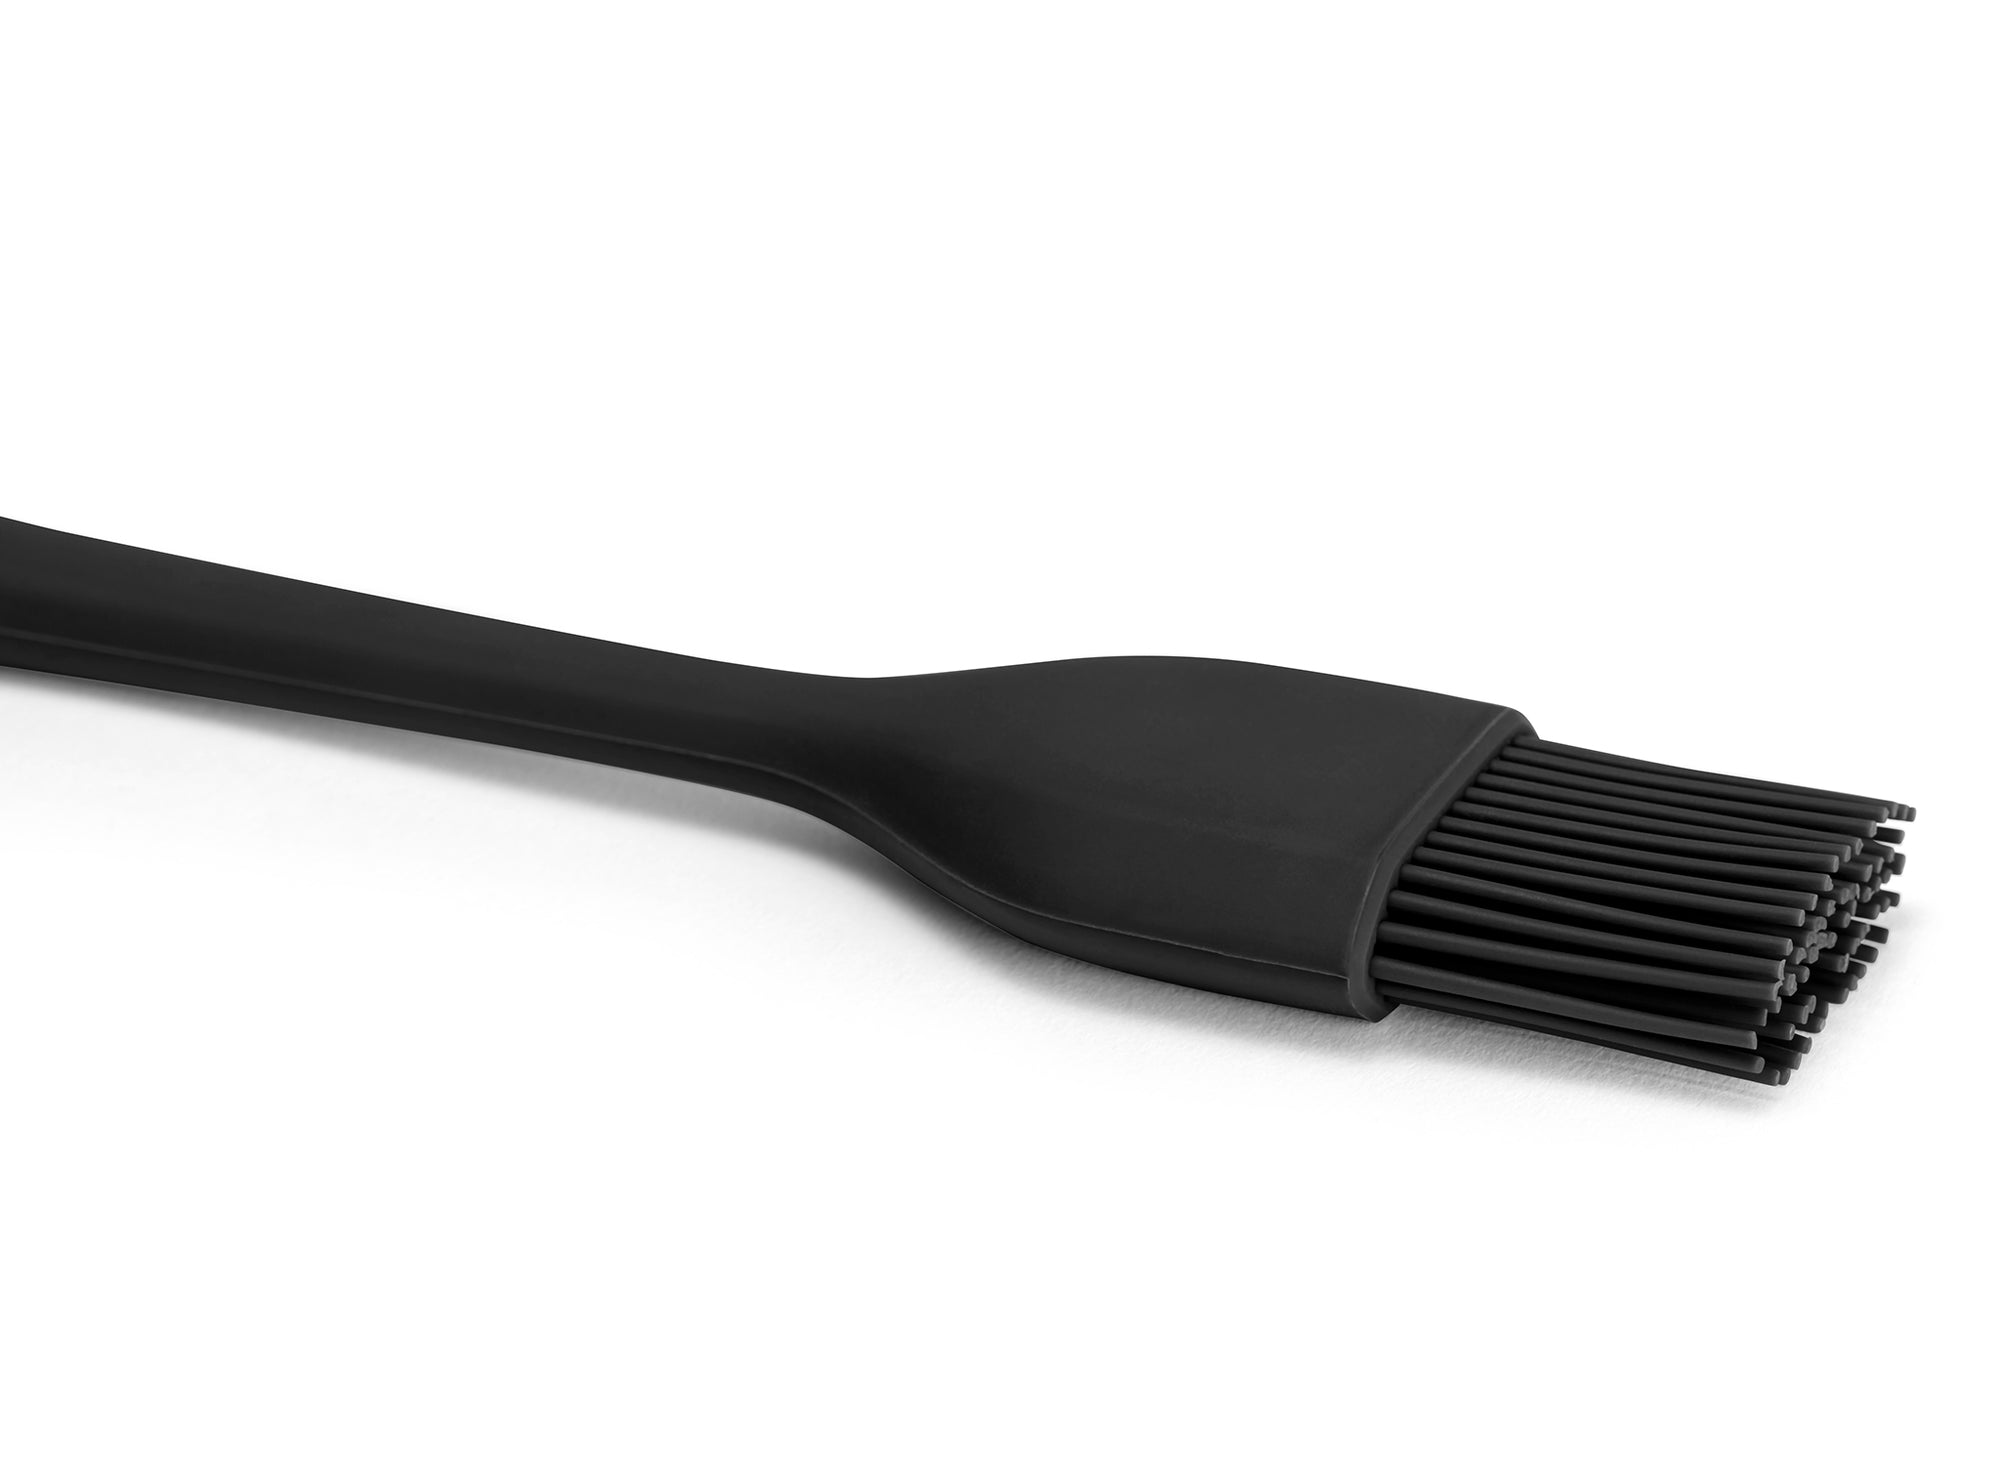 View of Black Misen Pastry Brush head with silicone bristles on a white background.